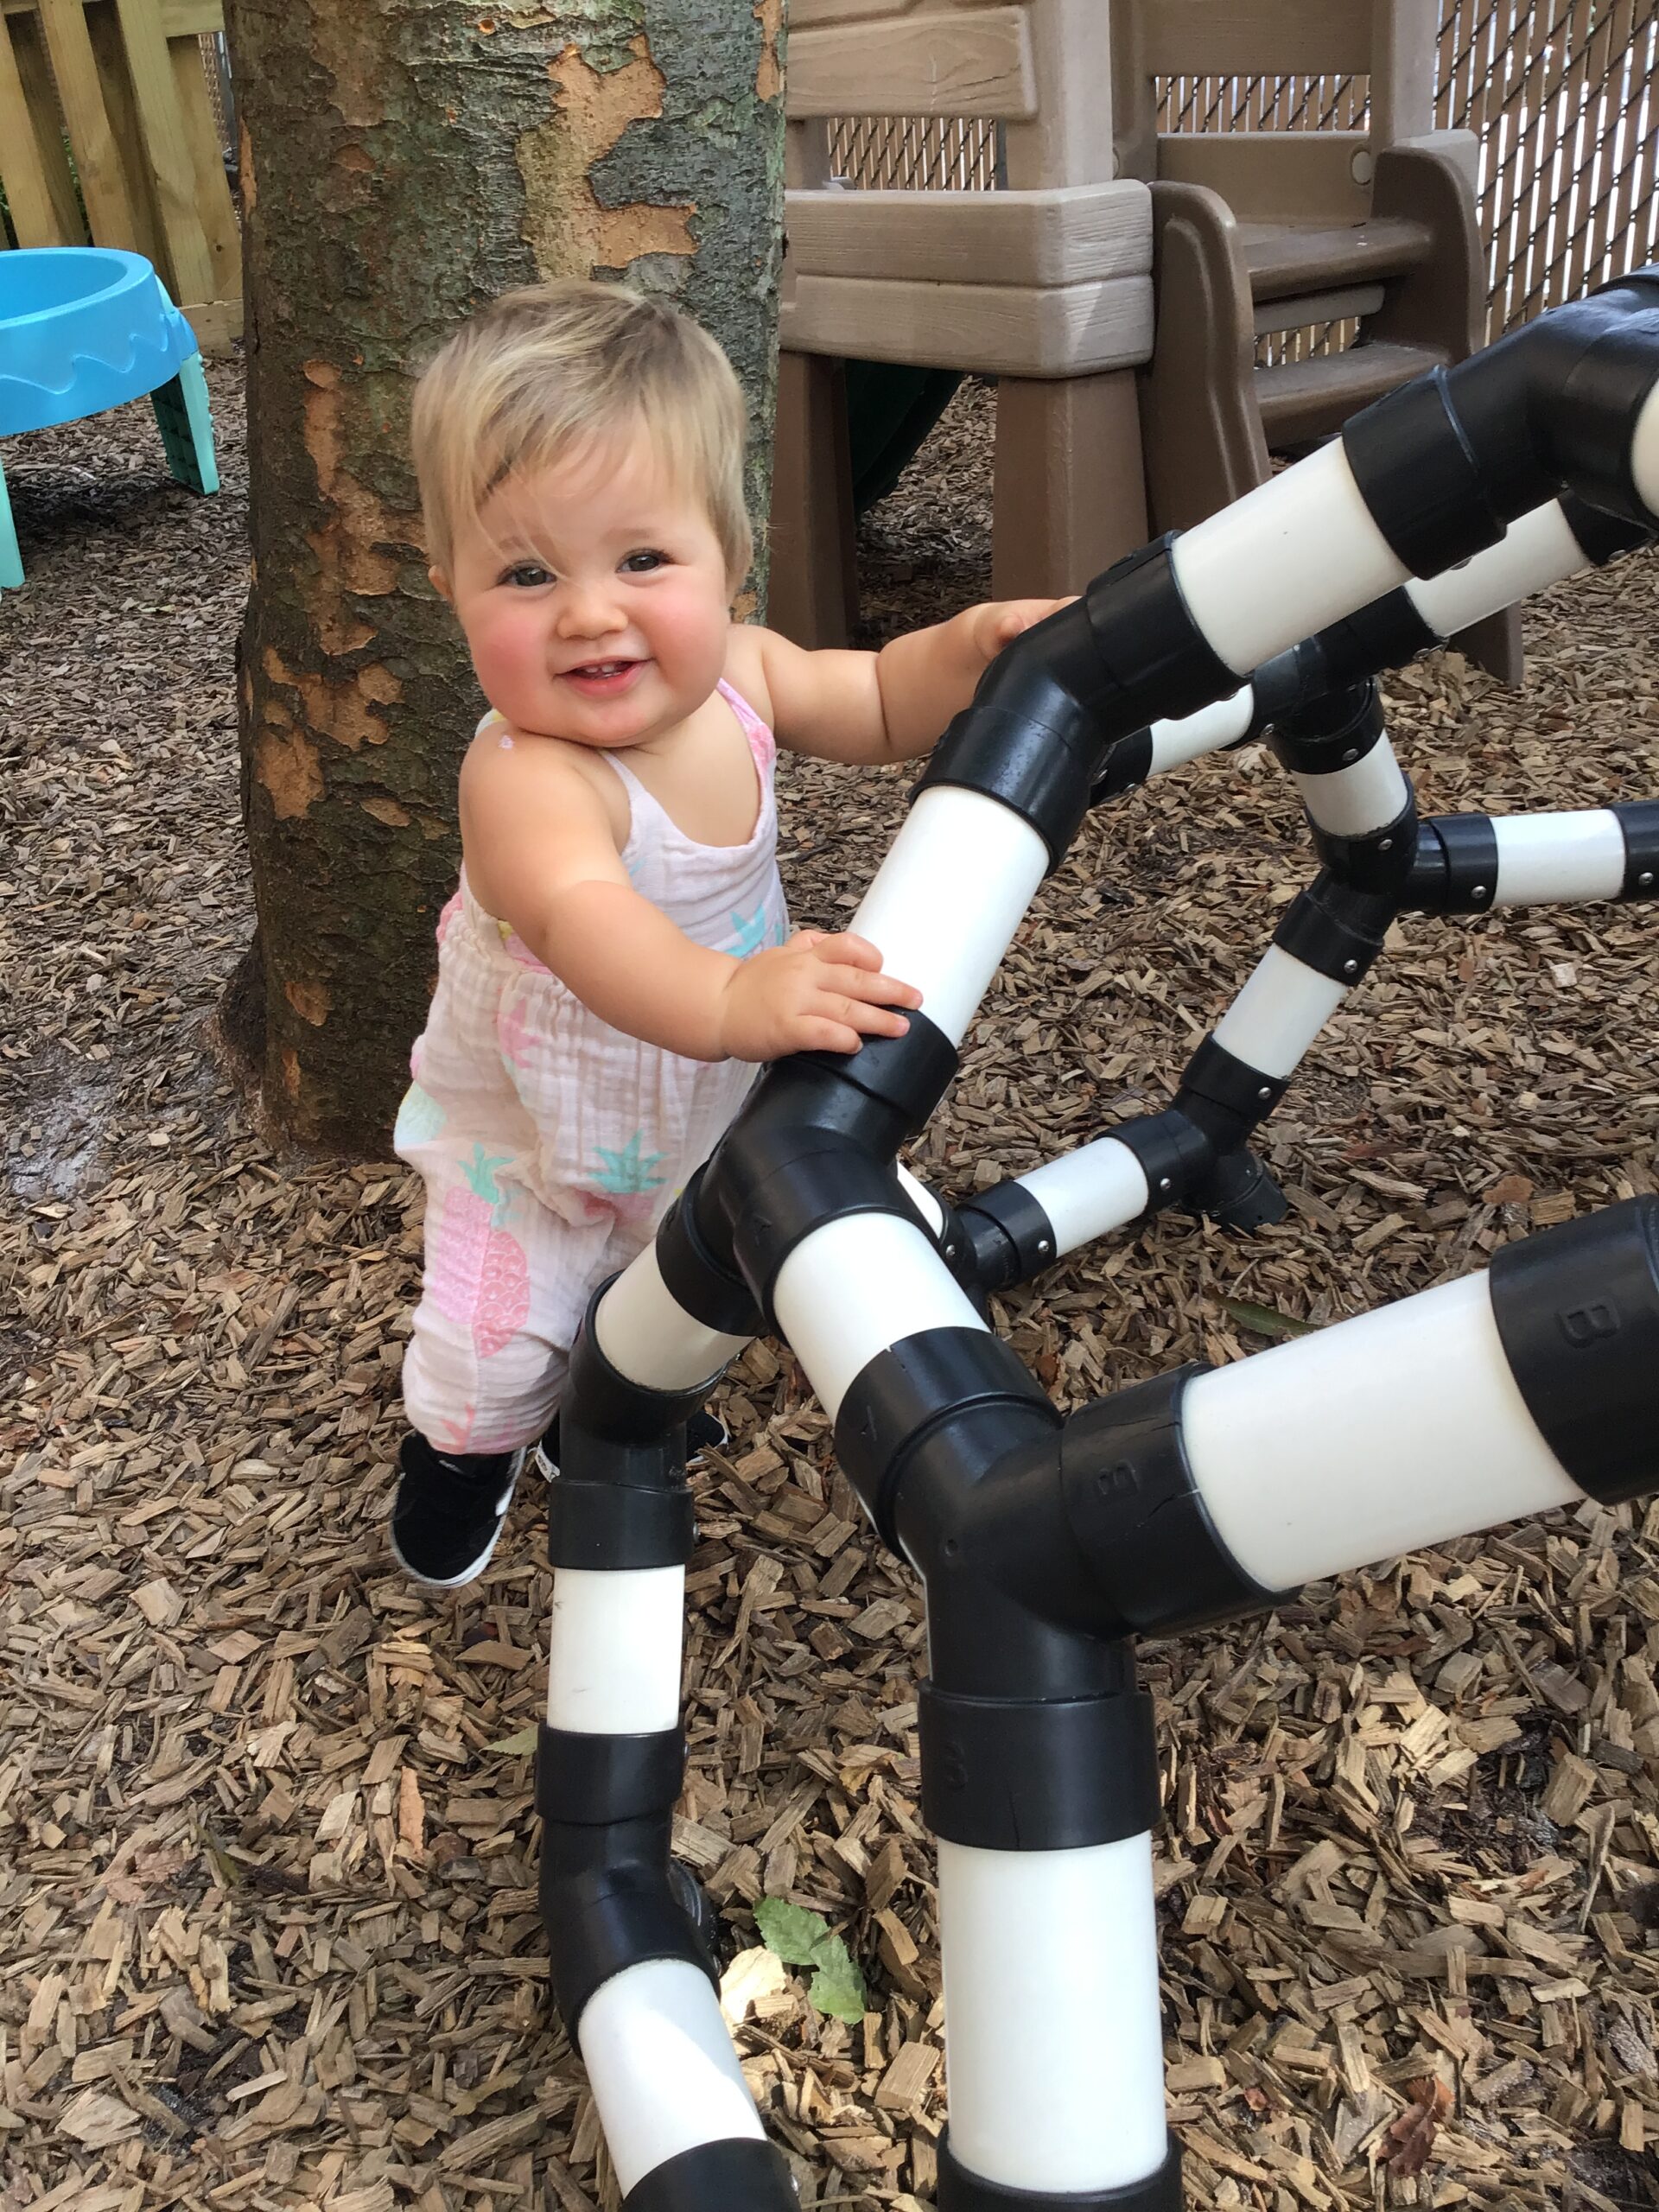 17 Tricks About daycares in bethesda md You Wish You Knew Before